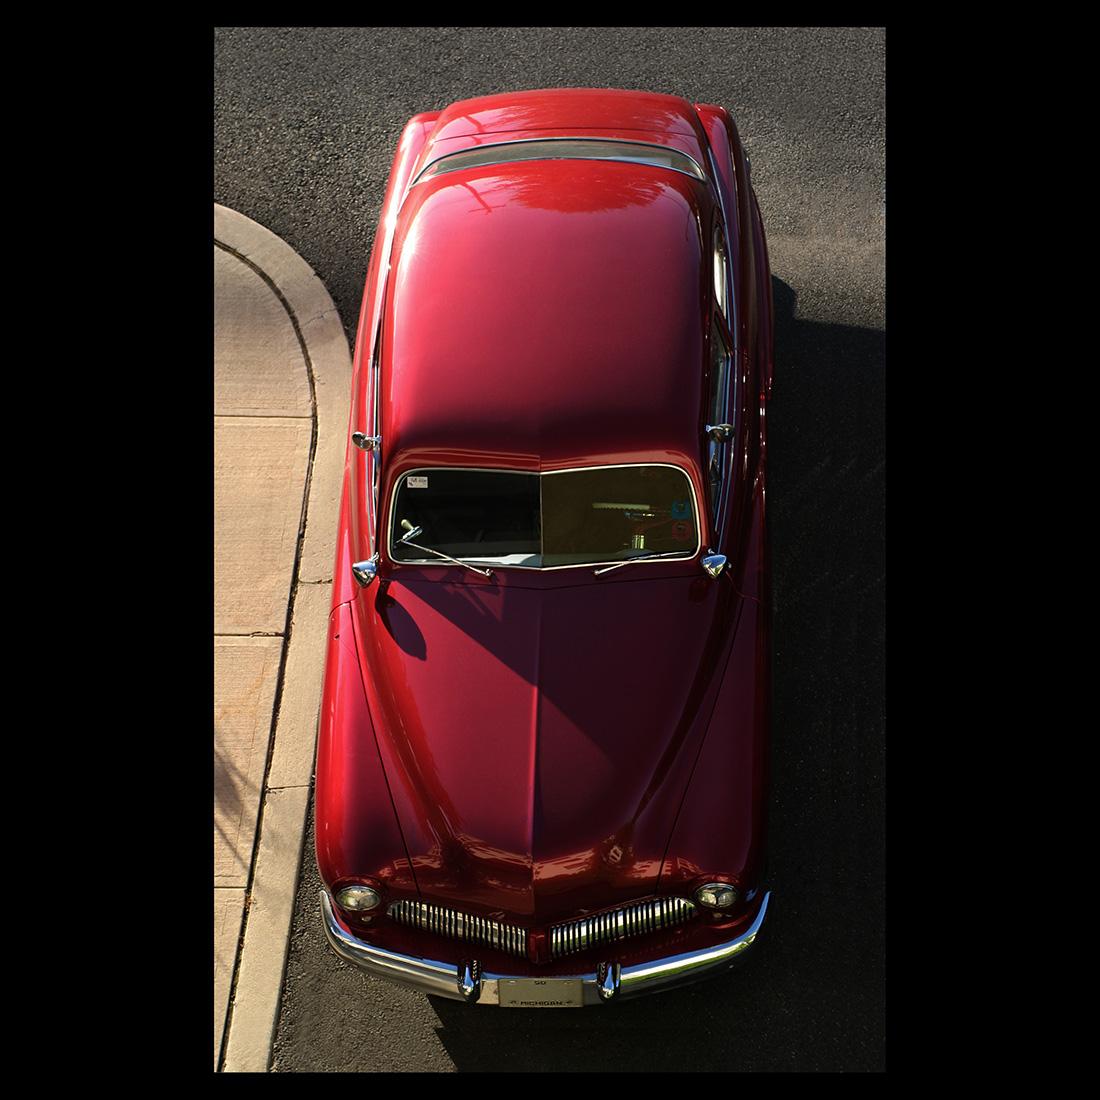 Red Mercury- Signed limited edition car print, USA, Contemporary, Vintage - Photograph by Geoff Halpin